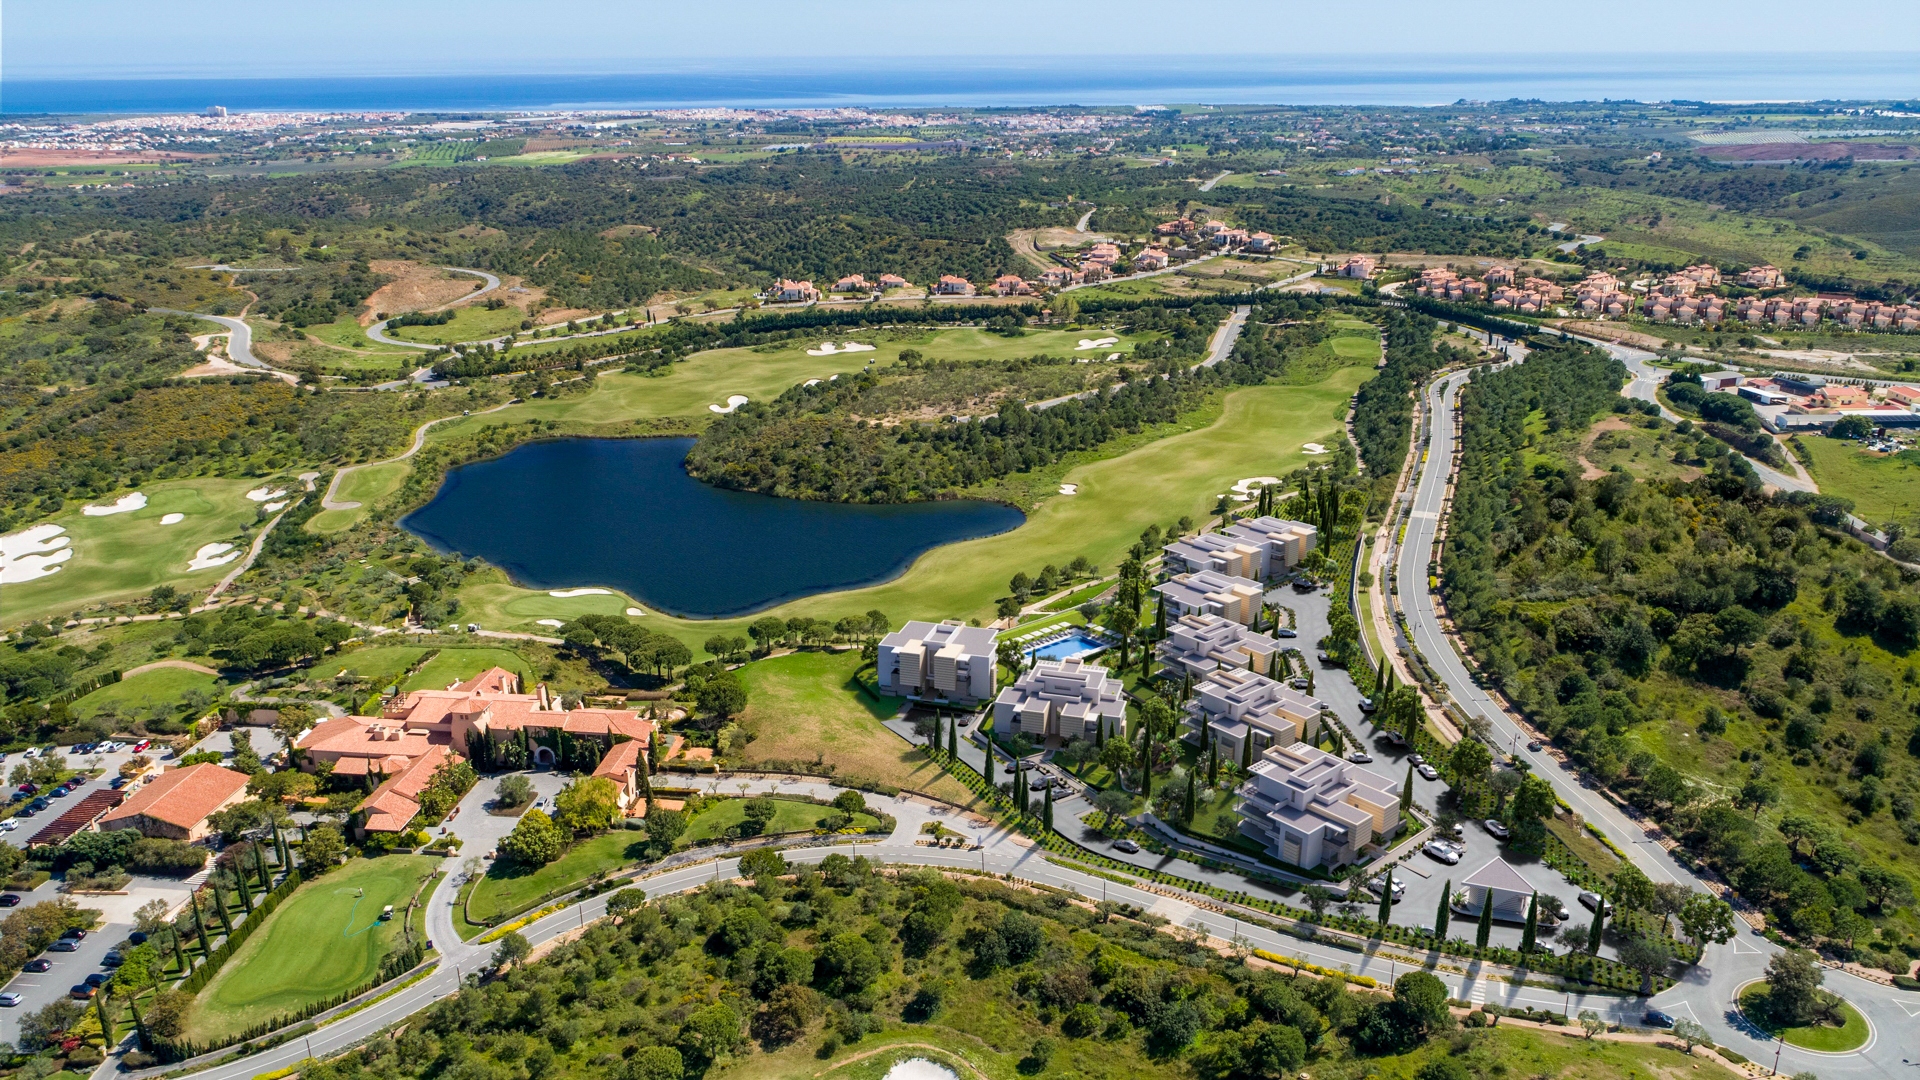 Luxury Penthouse, 3-Bedroom Duplex Apartments with Sea Views on One of the Finest Golf Courses in Europe, East Algarve | TV1835 Exclusive, luxury penthouse apartments with breath-taking views looking over the lake and golf course towards the ocean. Uniquely located near the Clubhouse at Monte Rei Golf & Country Club in beautifully landscaped gardens and with a large communal swimming pool.